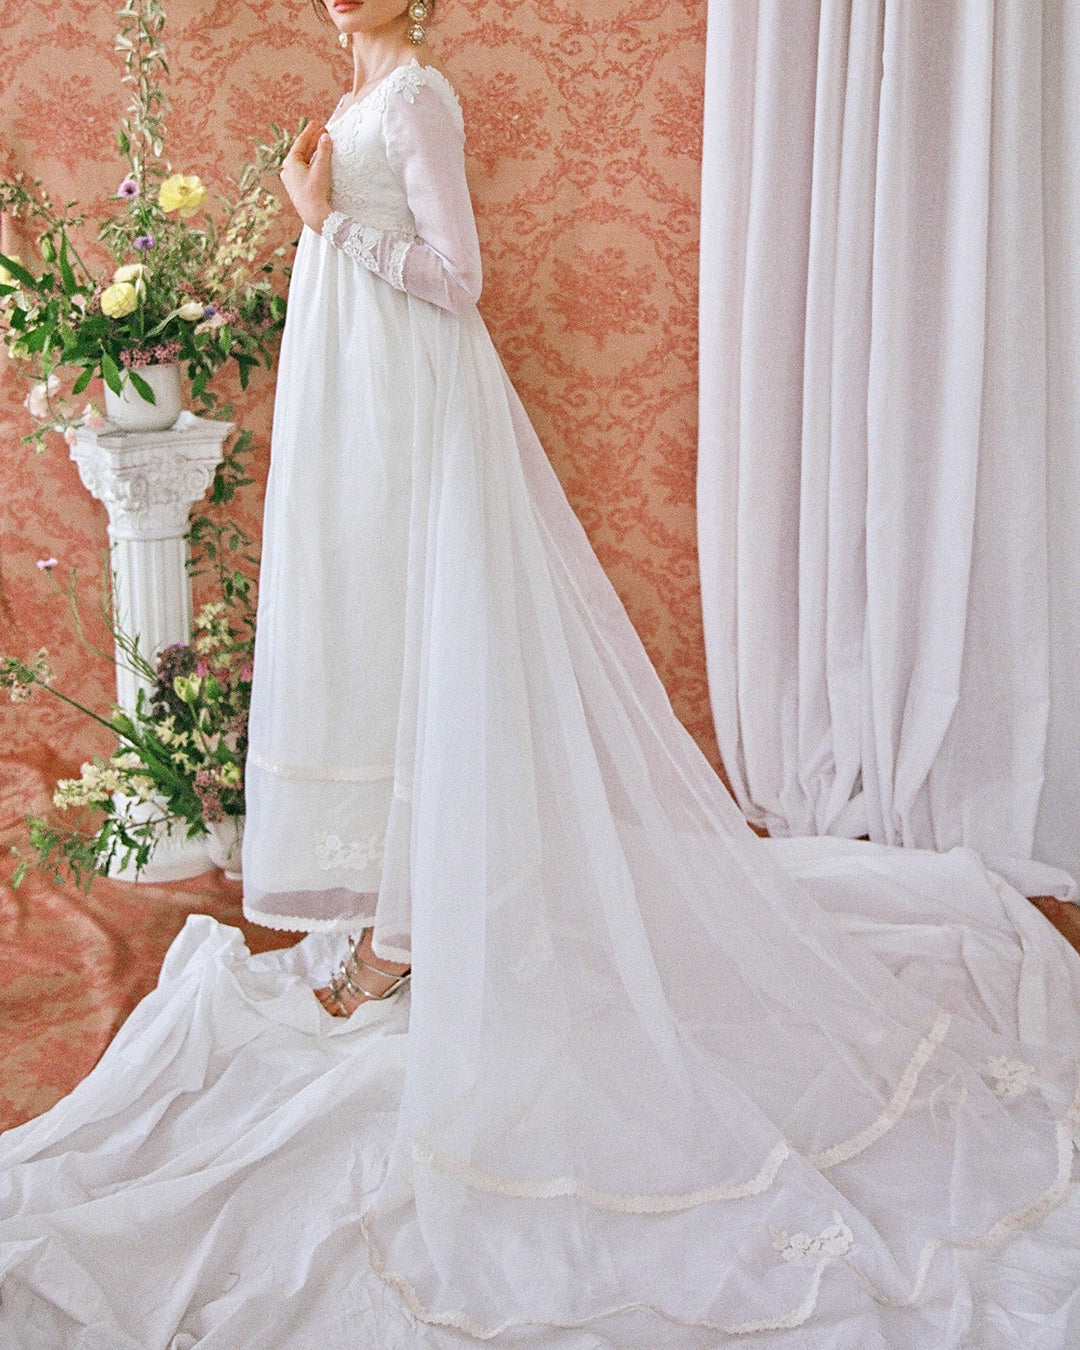 1960s Empire Waist Regency-Style Bridal Gown With Crochet Lace Appliqué And Train